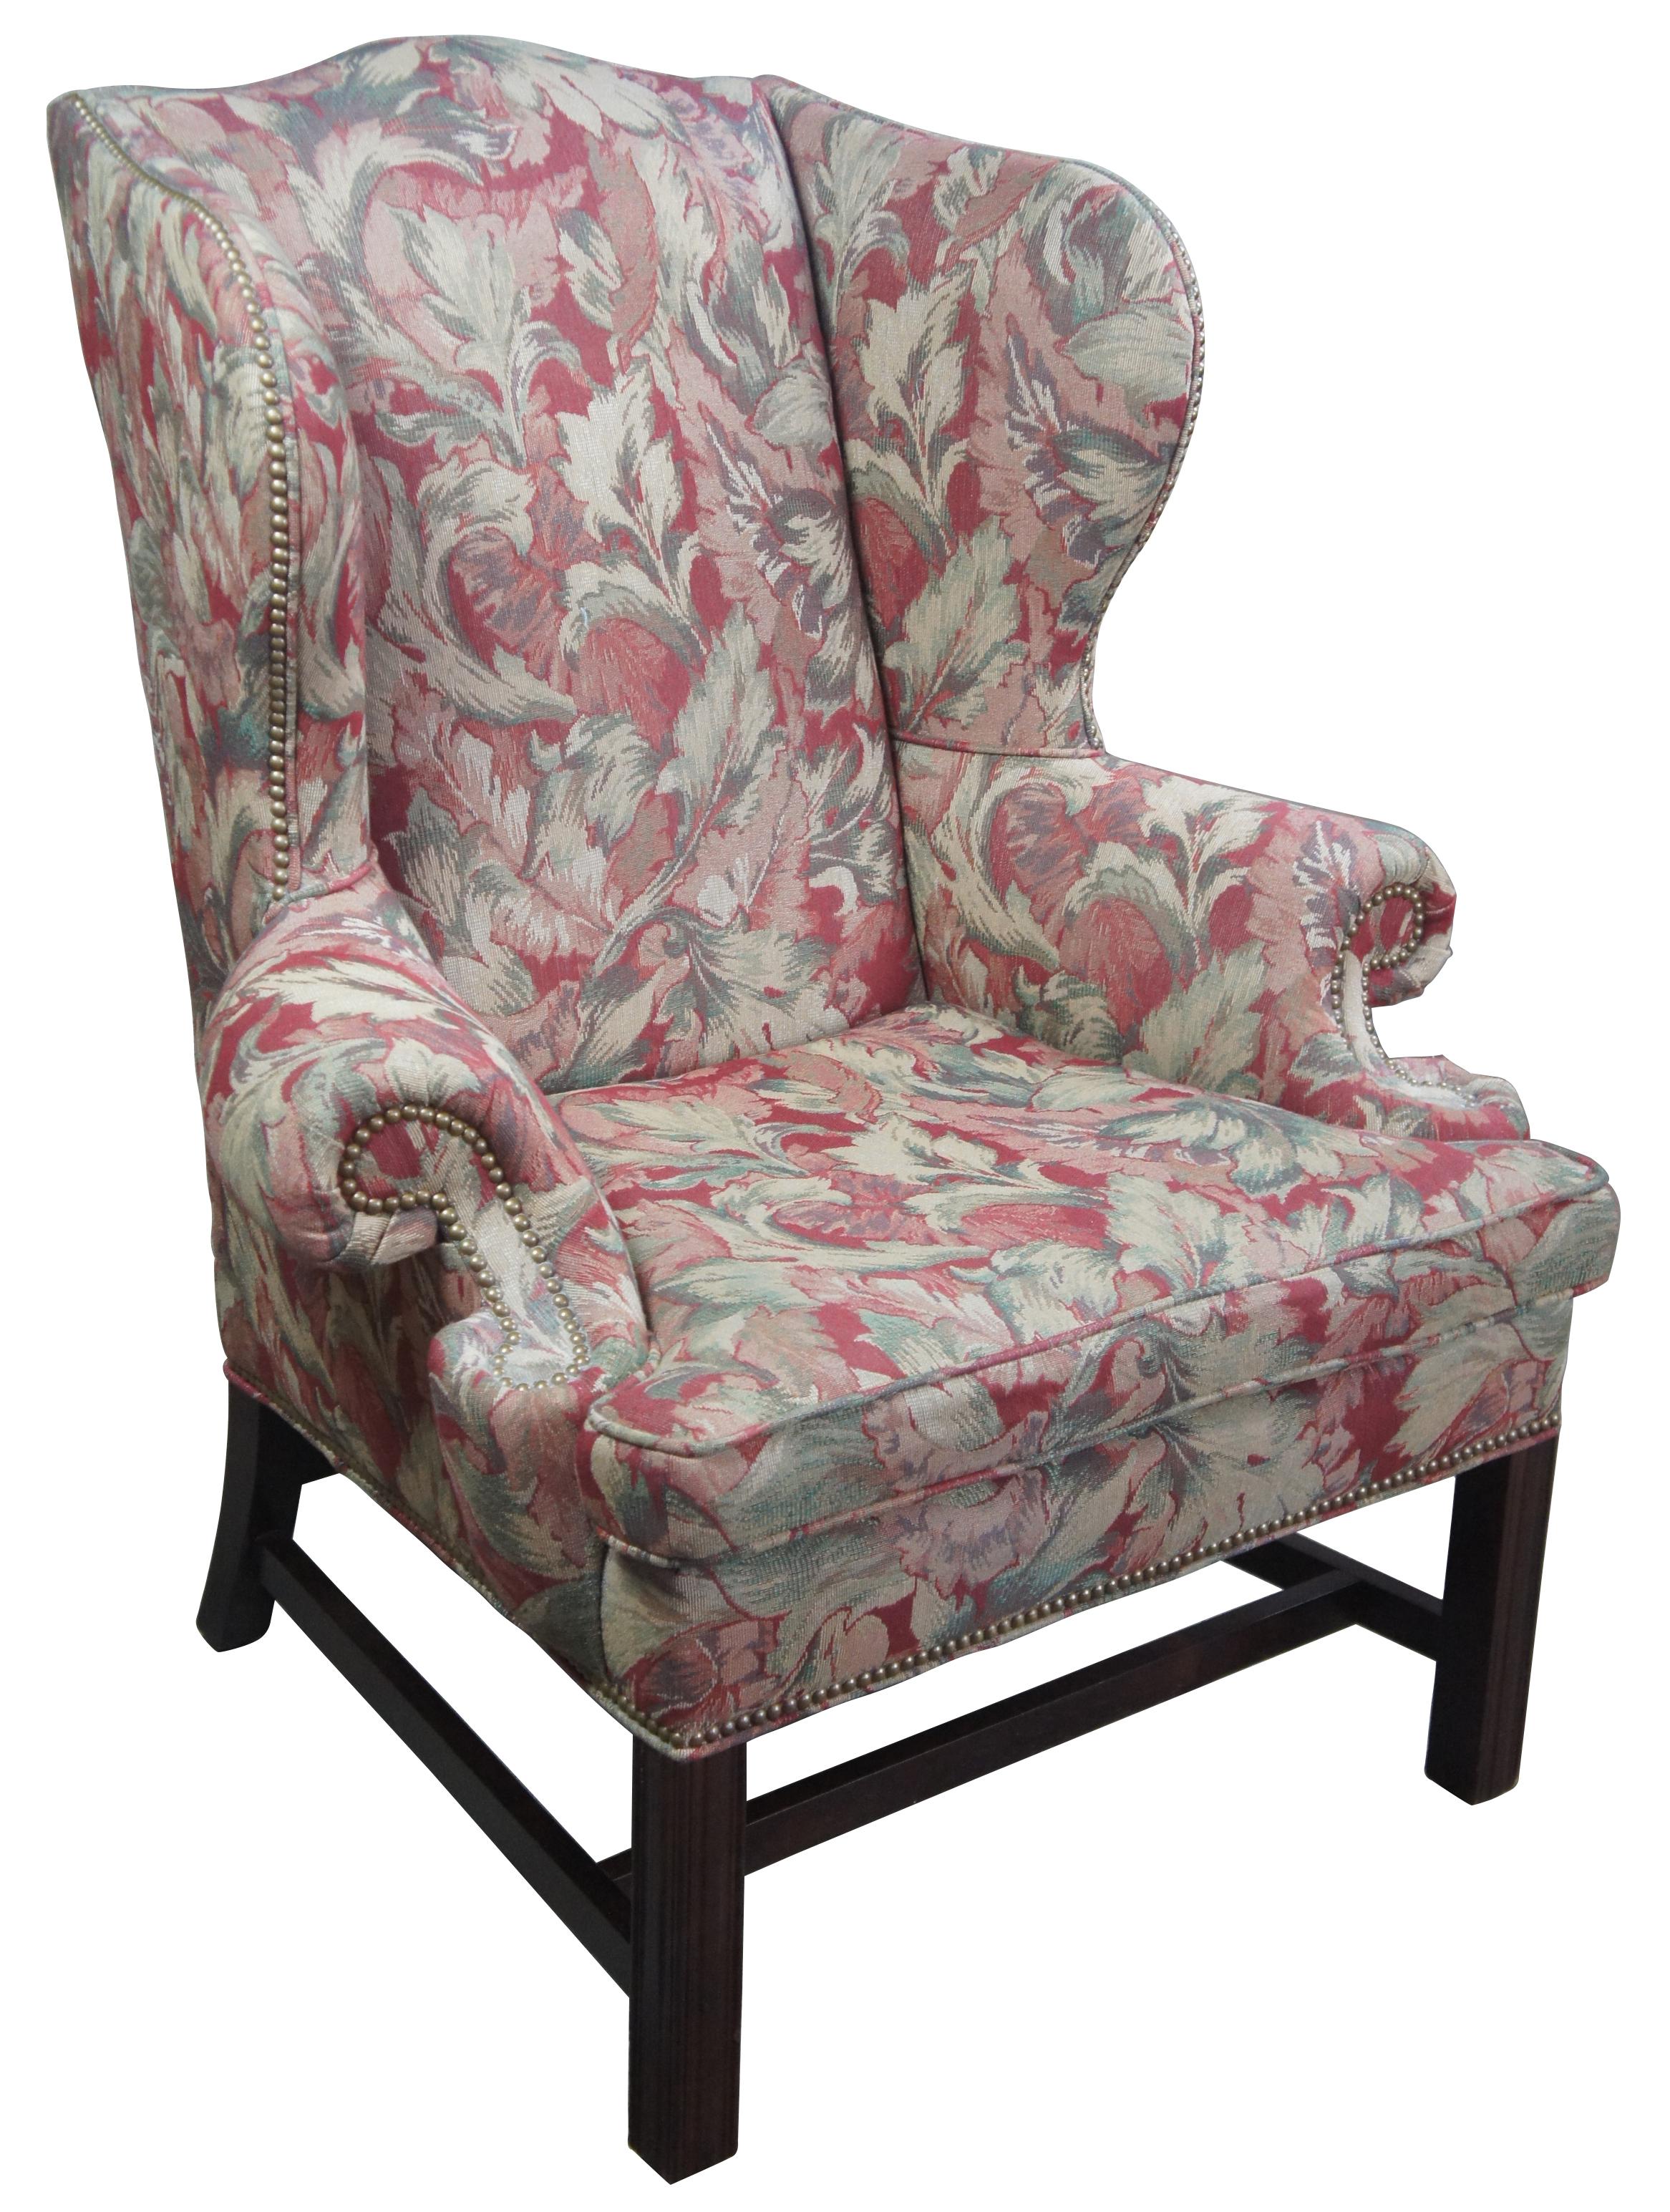 Century Furniture Chippendale style floral wingback armchair with nailhead trim

Vintage Century Furniture floral wingback arm chair. Features a slight camelback with rolled arms, nailhead trim and floral upholstery. Upholstered by Century